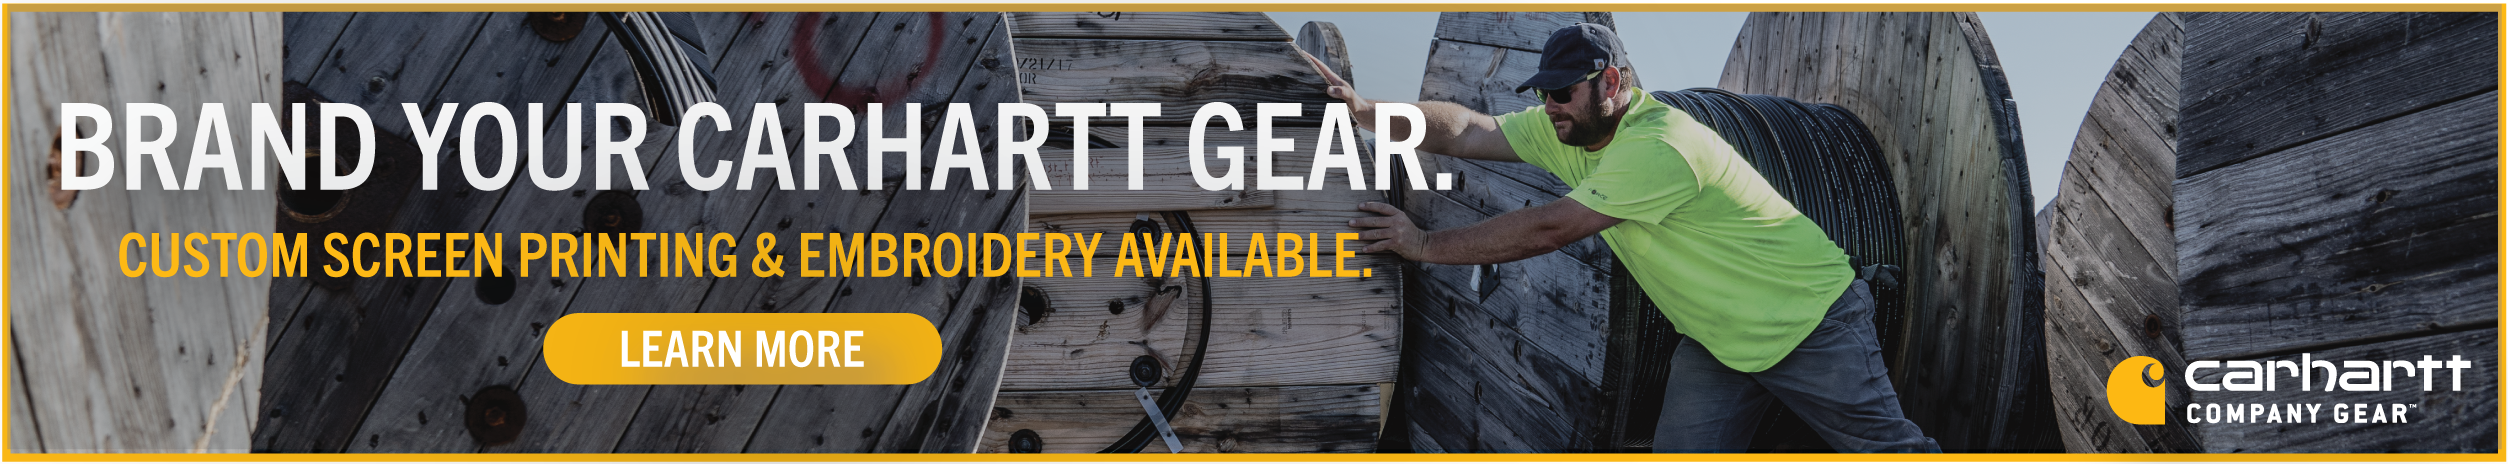 Image: Carhartt Banner offering options to customize products